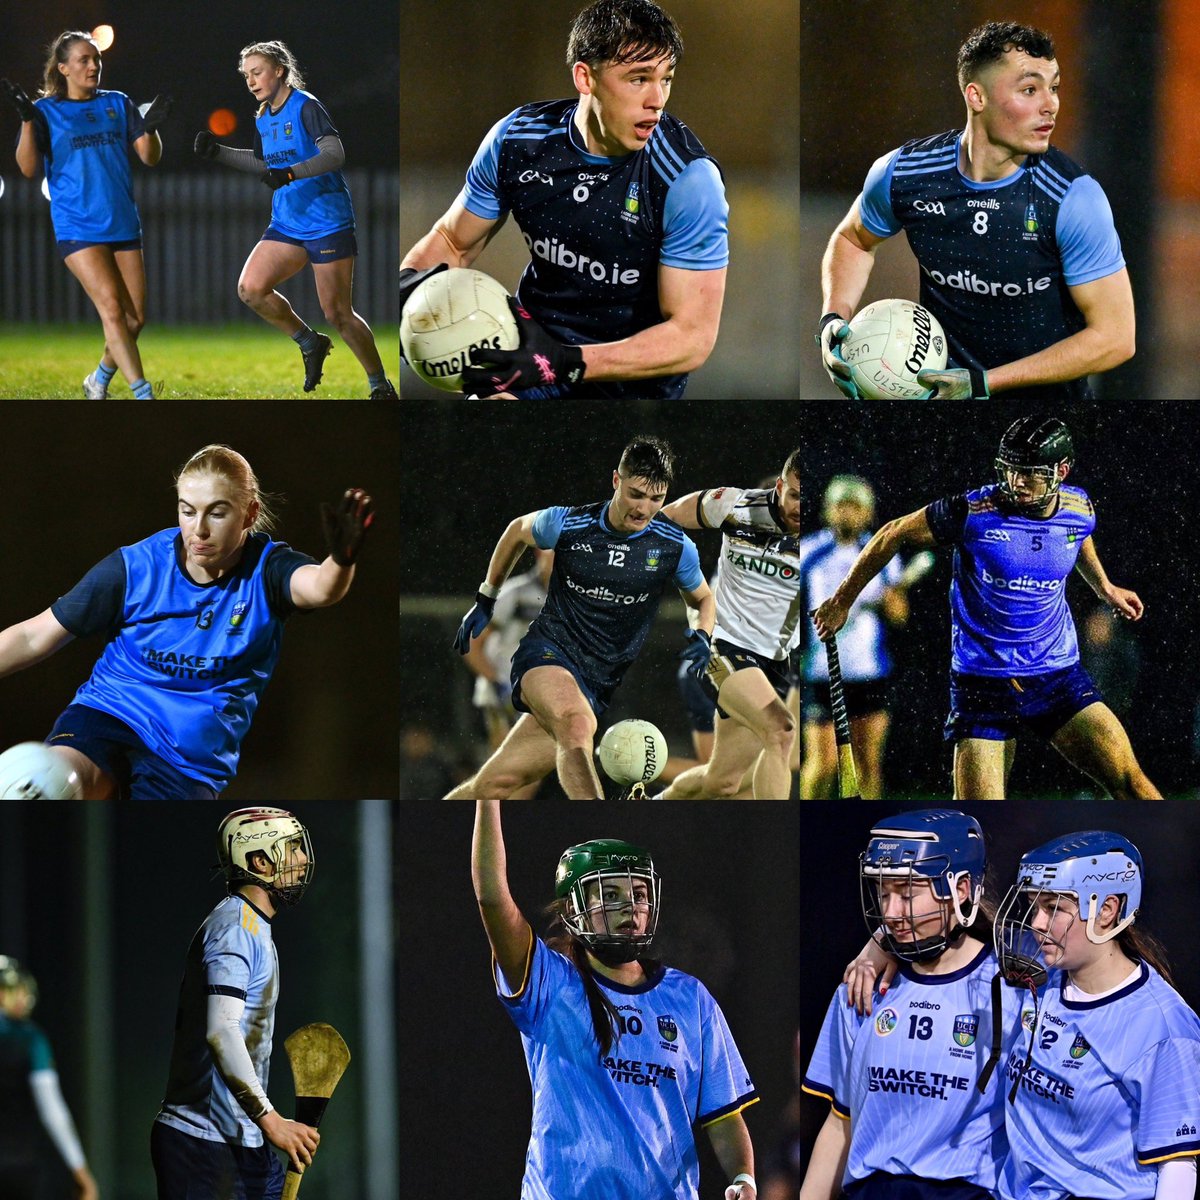 Are you looking to study a PME, Masters or PhD in UCD next September? 

Apply for our Graduate Sports Scholarship and The Brian Mullins GAA/GPA Graduate Scholarship at the following link shorturl.at/amuzW

Benefits include 50% and 100% fee reduction #ucdgaa